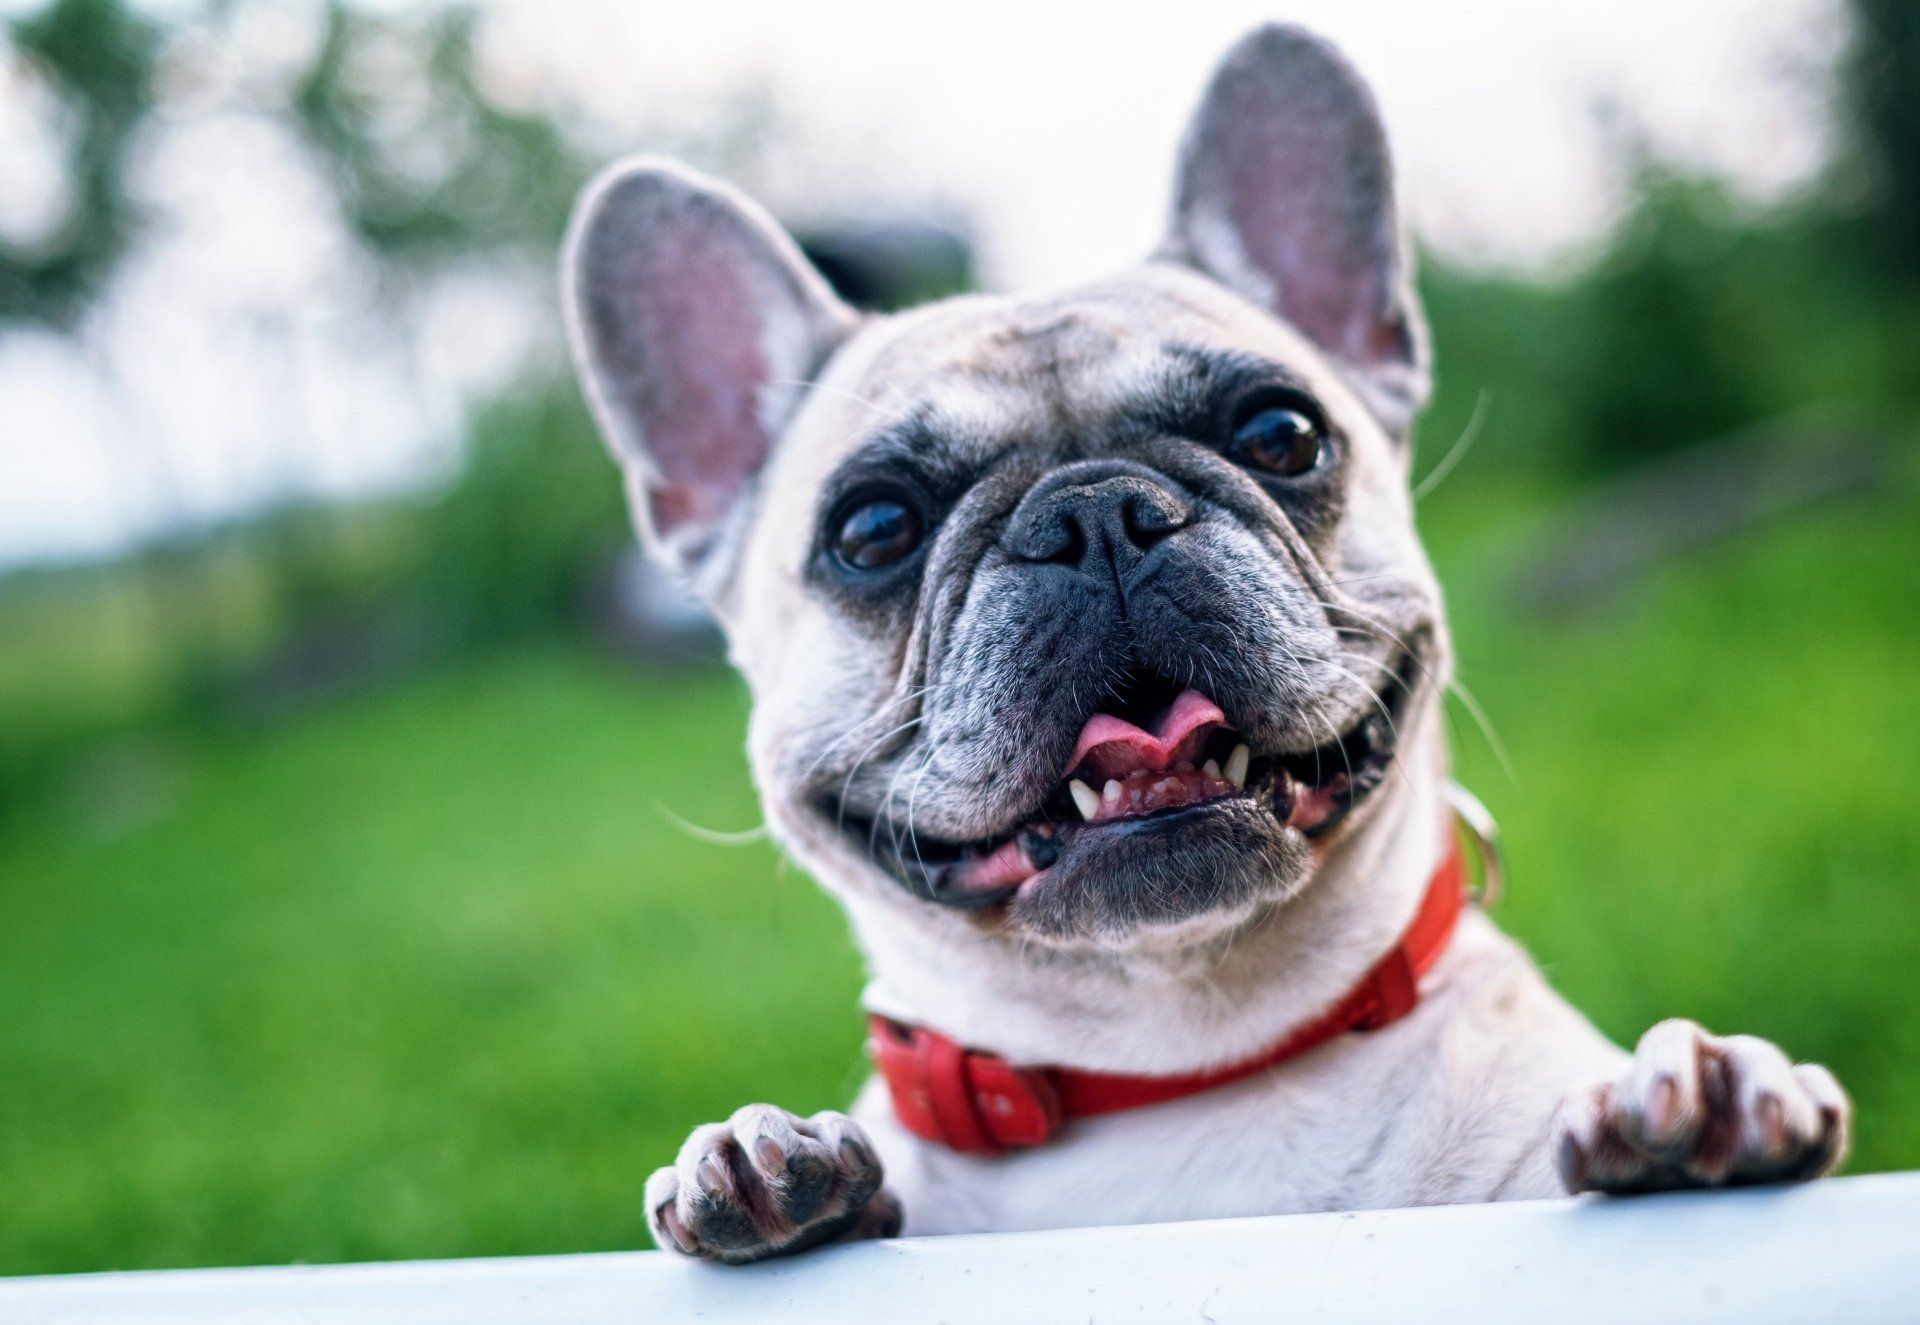 a french bulldog wearing a red collar is peeking over a white fence .